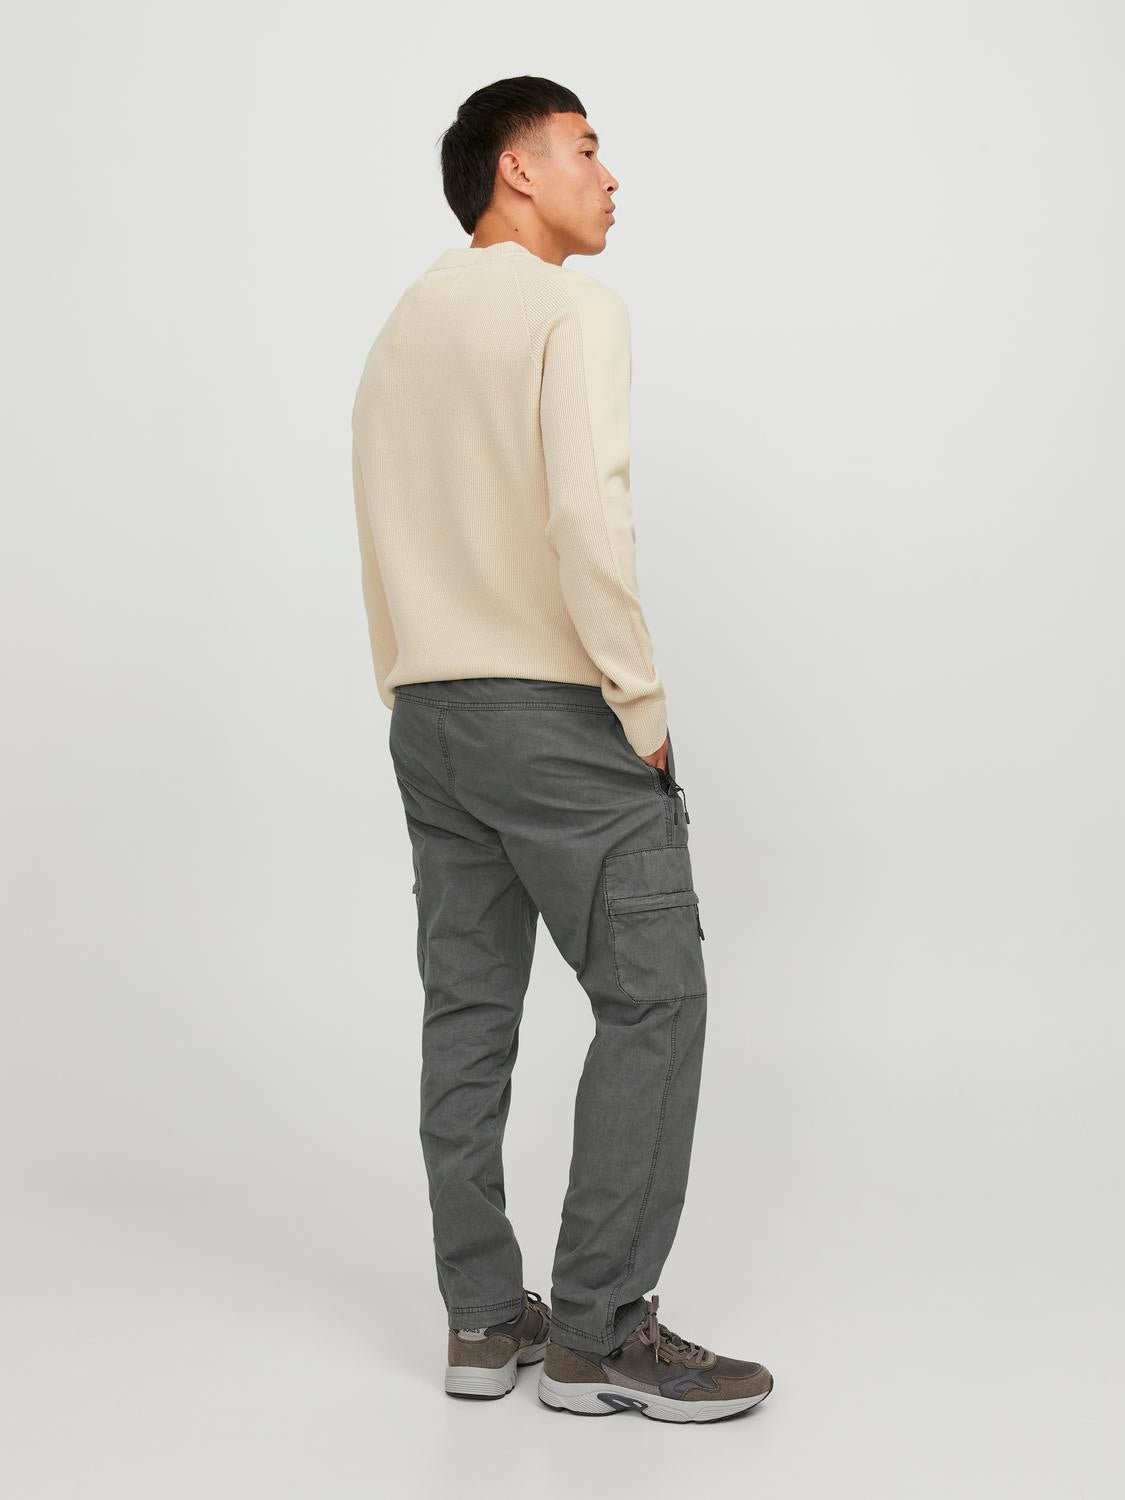 New Look relaxed fit smart pants in camel | ASOS